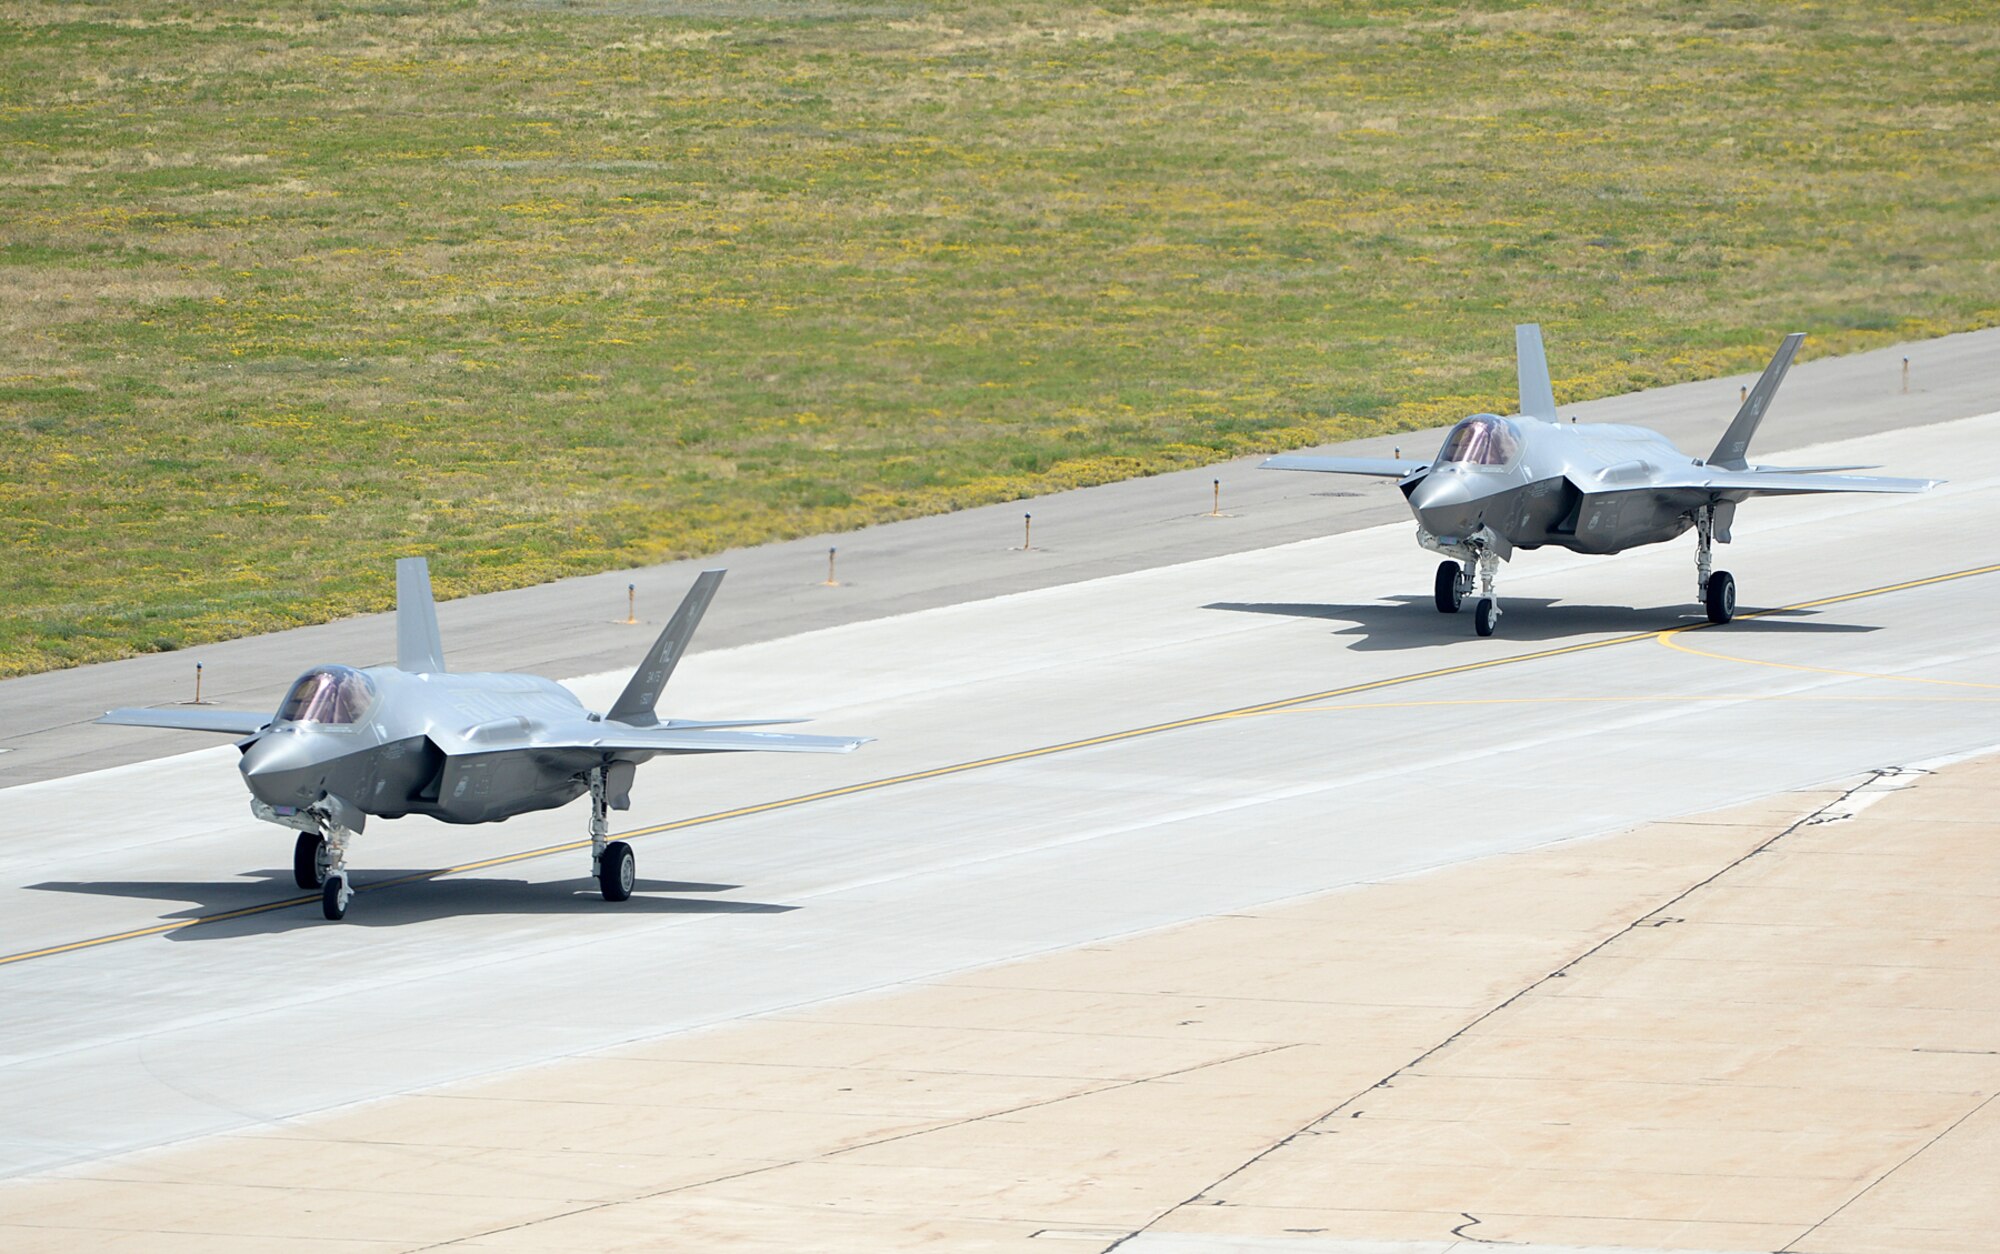 The first two combat-coded F-35A Lightning II aircraft arrive at Hill Air Force Base, Utah, Sept. 2. Hill was selected as the location for the first operational F-35 fleet and will receive up to 70 additional jets on a staggered basis through 2019. Hill Airmen from the active-duty 388th and Reserve 419th Fighter Wings will fly and maintain the fleet. Standing up the first operational F-35 unit at Hill allows for synergy with the co-located F-35 depot maintenance team, and access to the nearby Utah Test and Training Range. (U.S. Air Force photo by Alex R. Lloyd/Released)